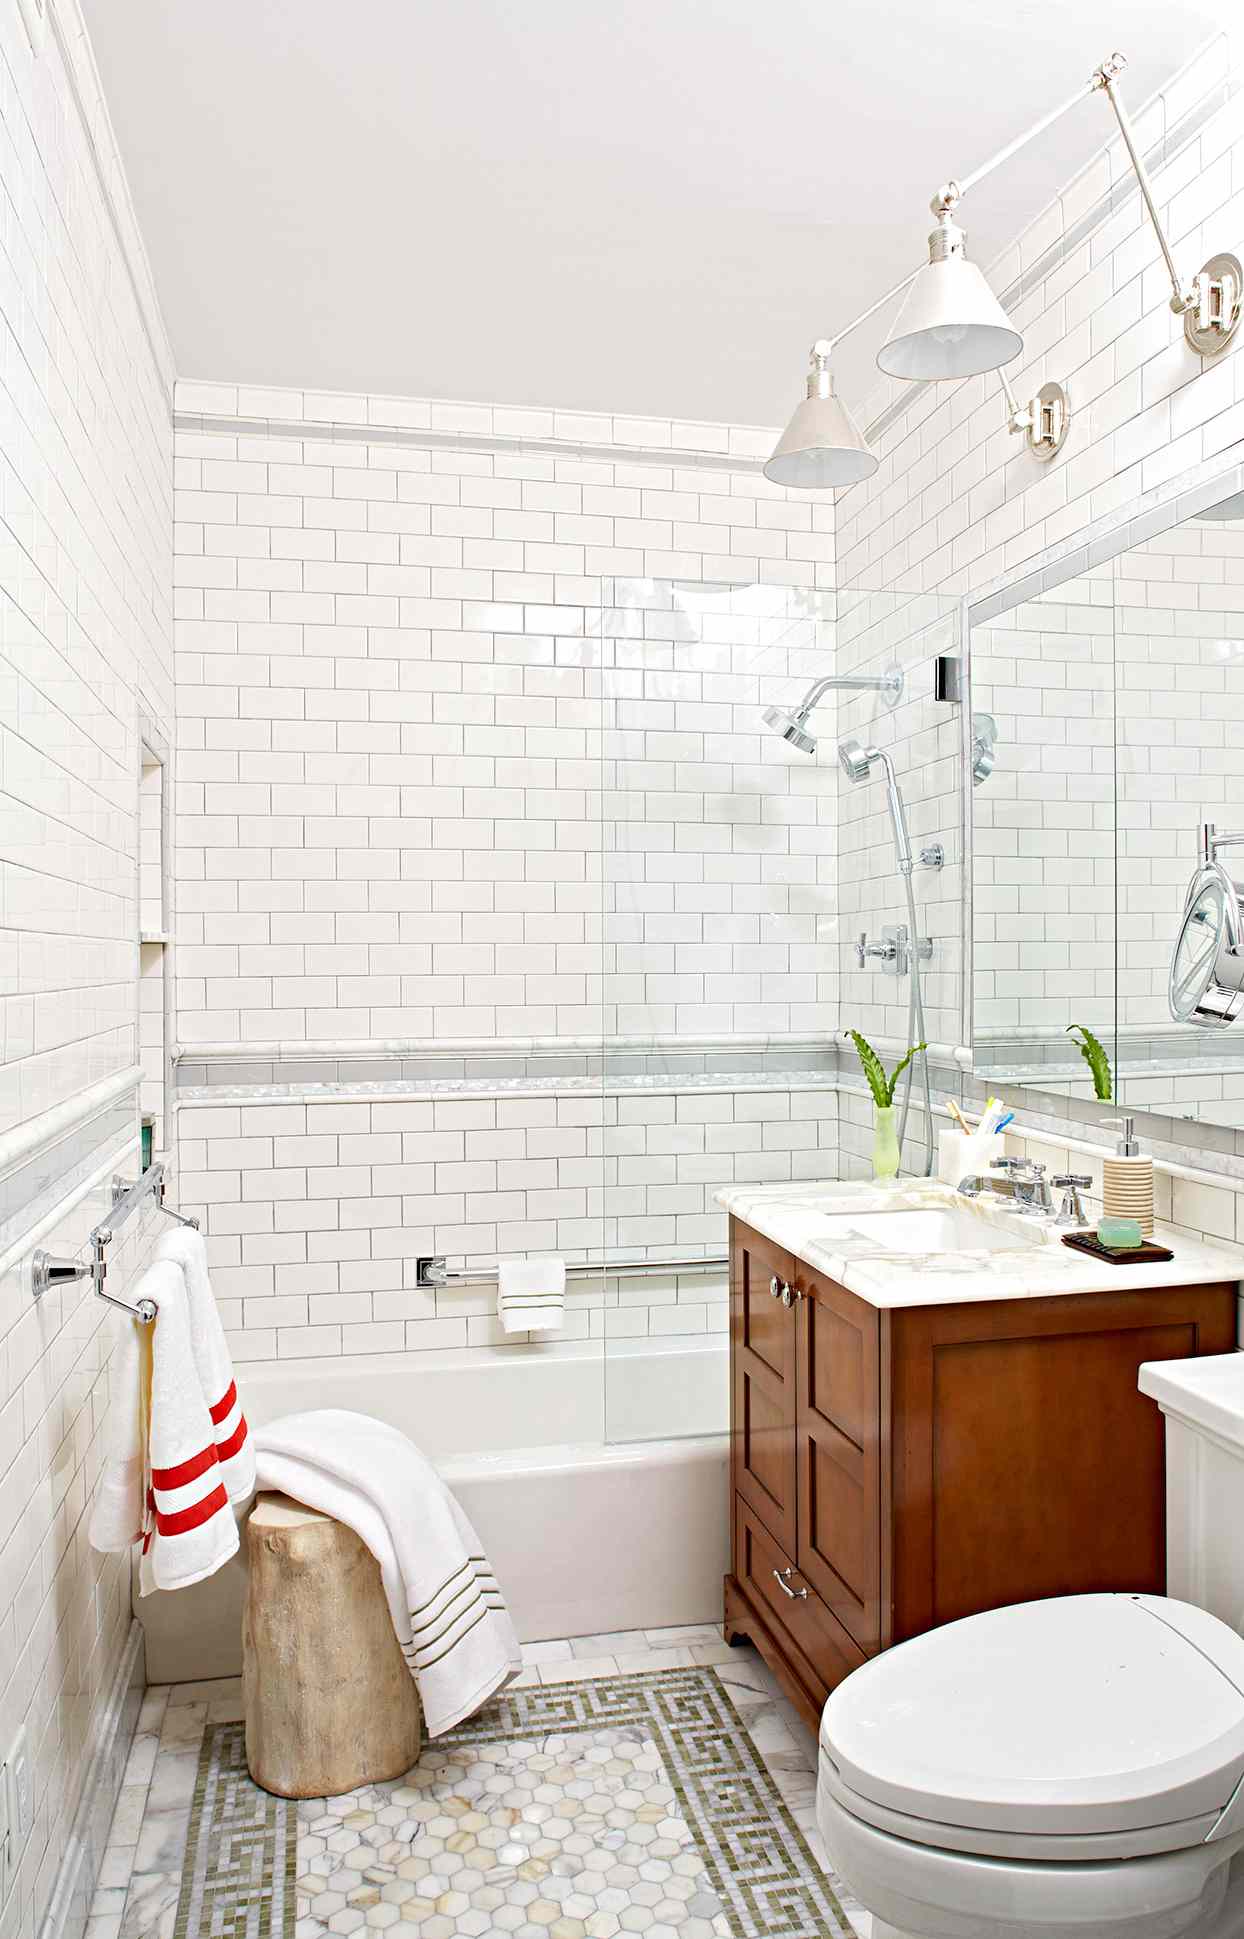 Tile A Shower Enclosure Or Tub Surround, How To Install Subway Tile In A Bathroom Shower